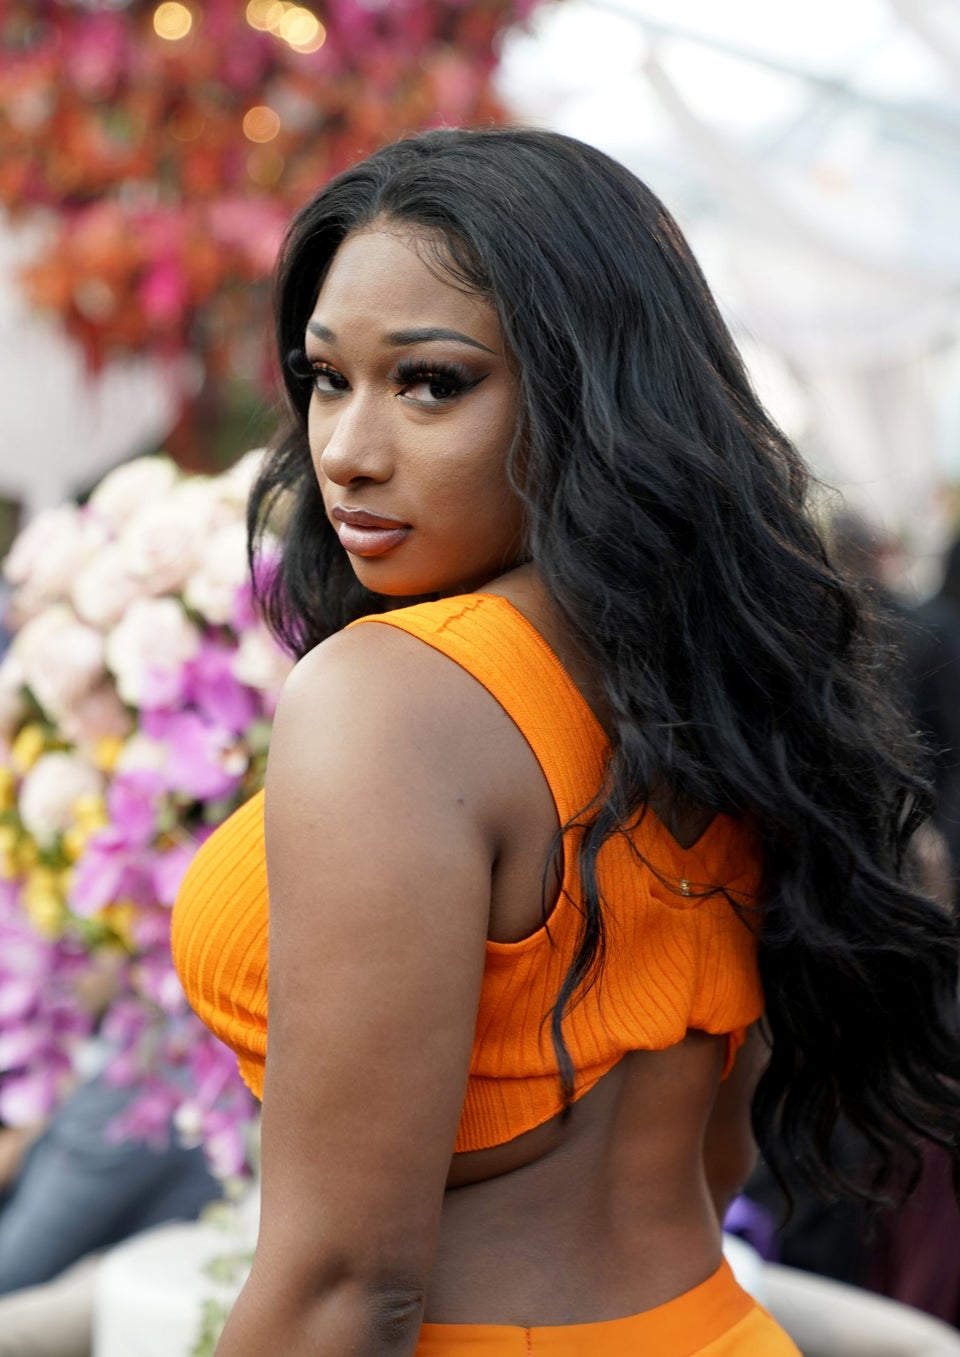 Dear Megan Thee Stallion: Black Women Are Standing With You